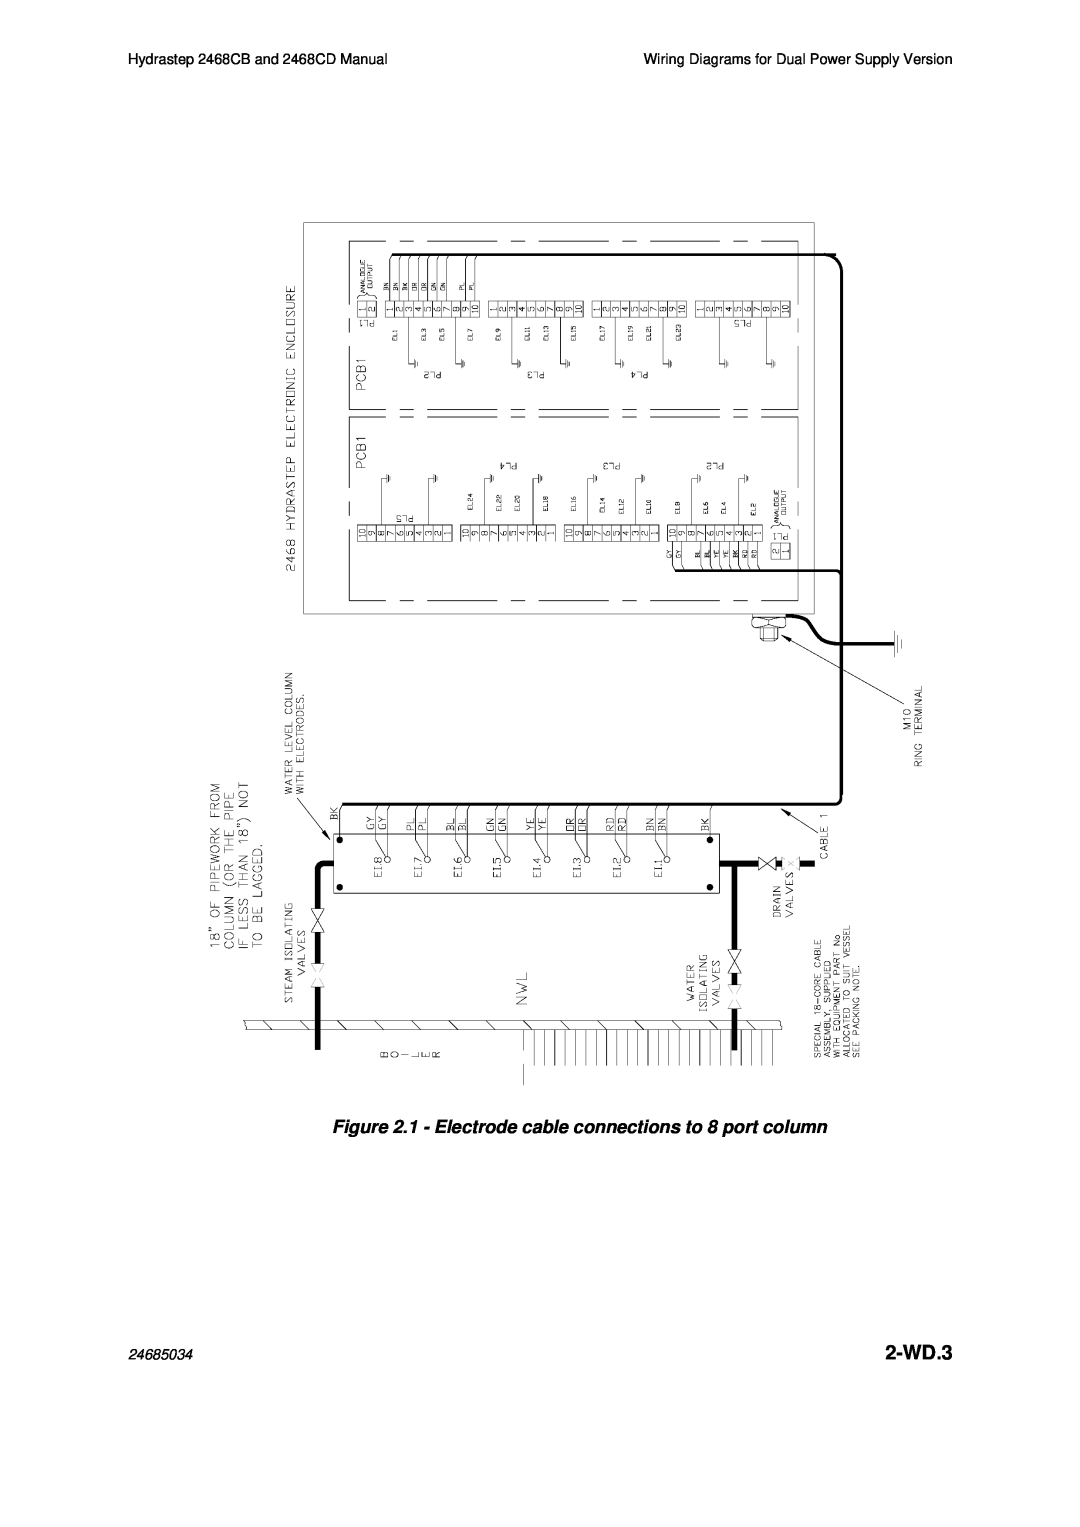 Emerson 2468CD, 2468CB manual 2-WD.3, Wiring Diagrams for Dual Power Supply Version, 24685034 